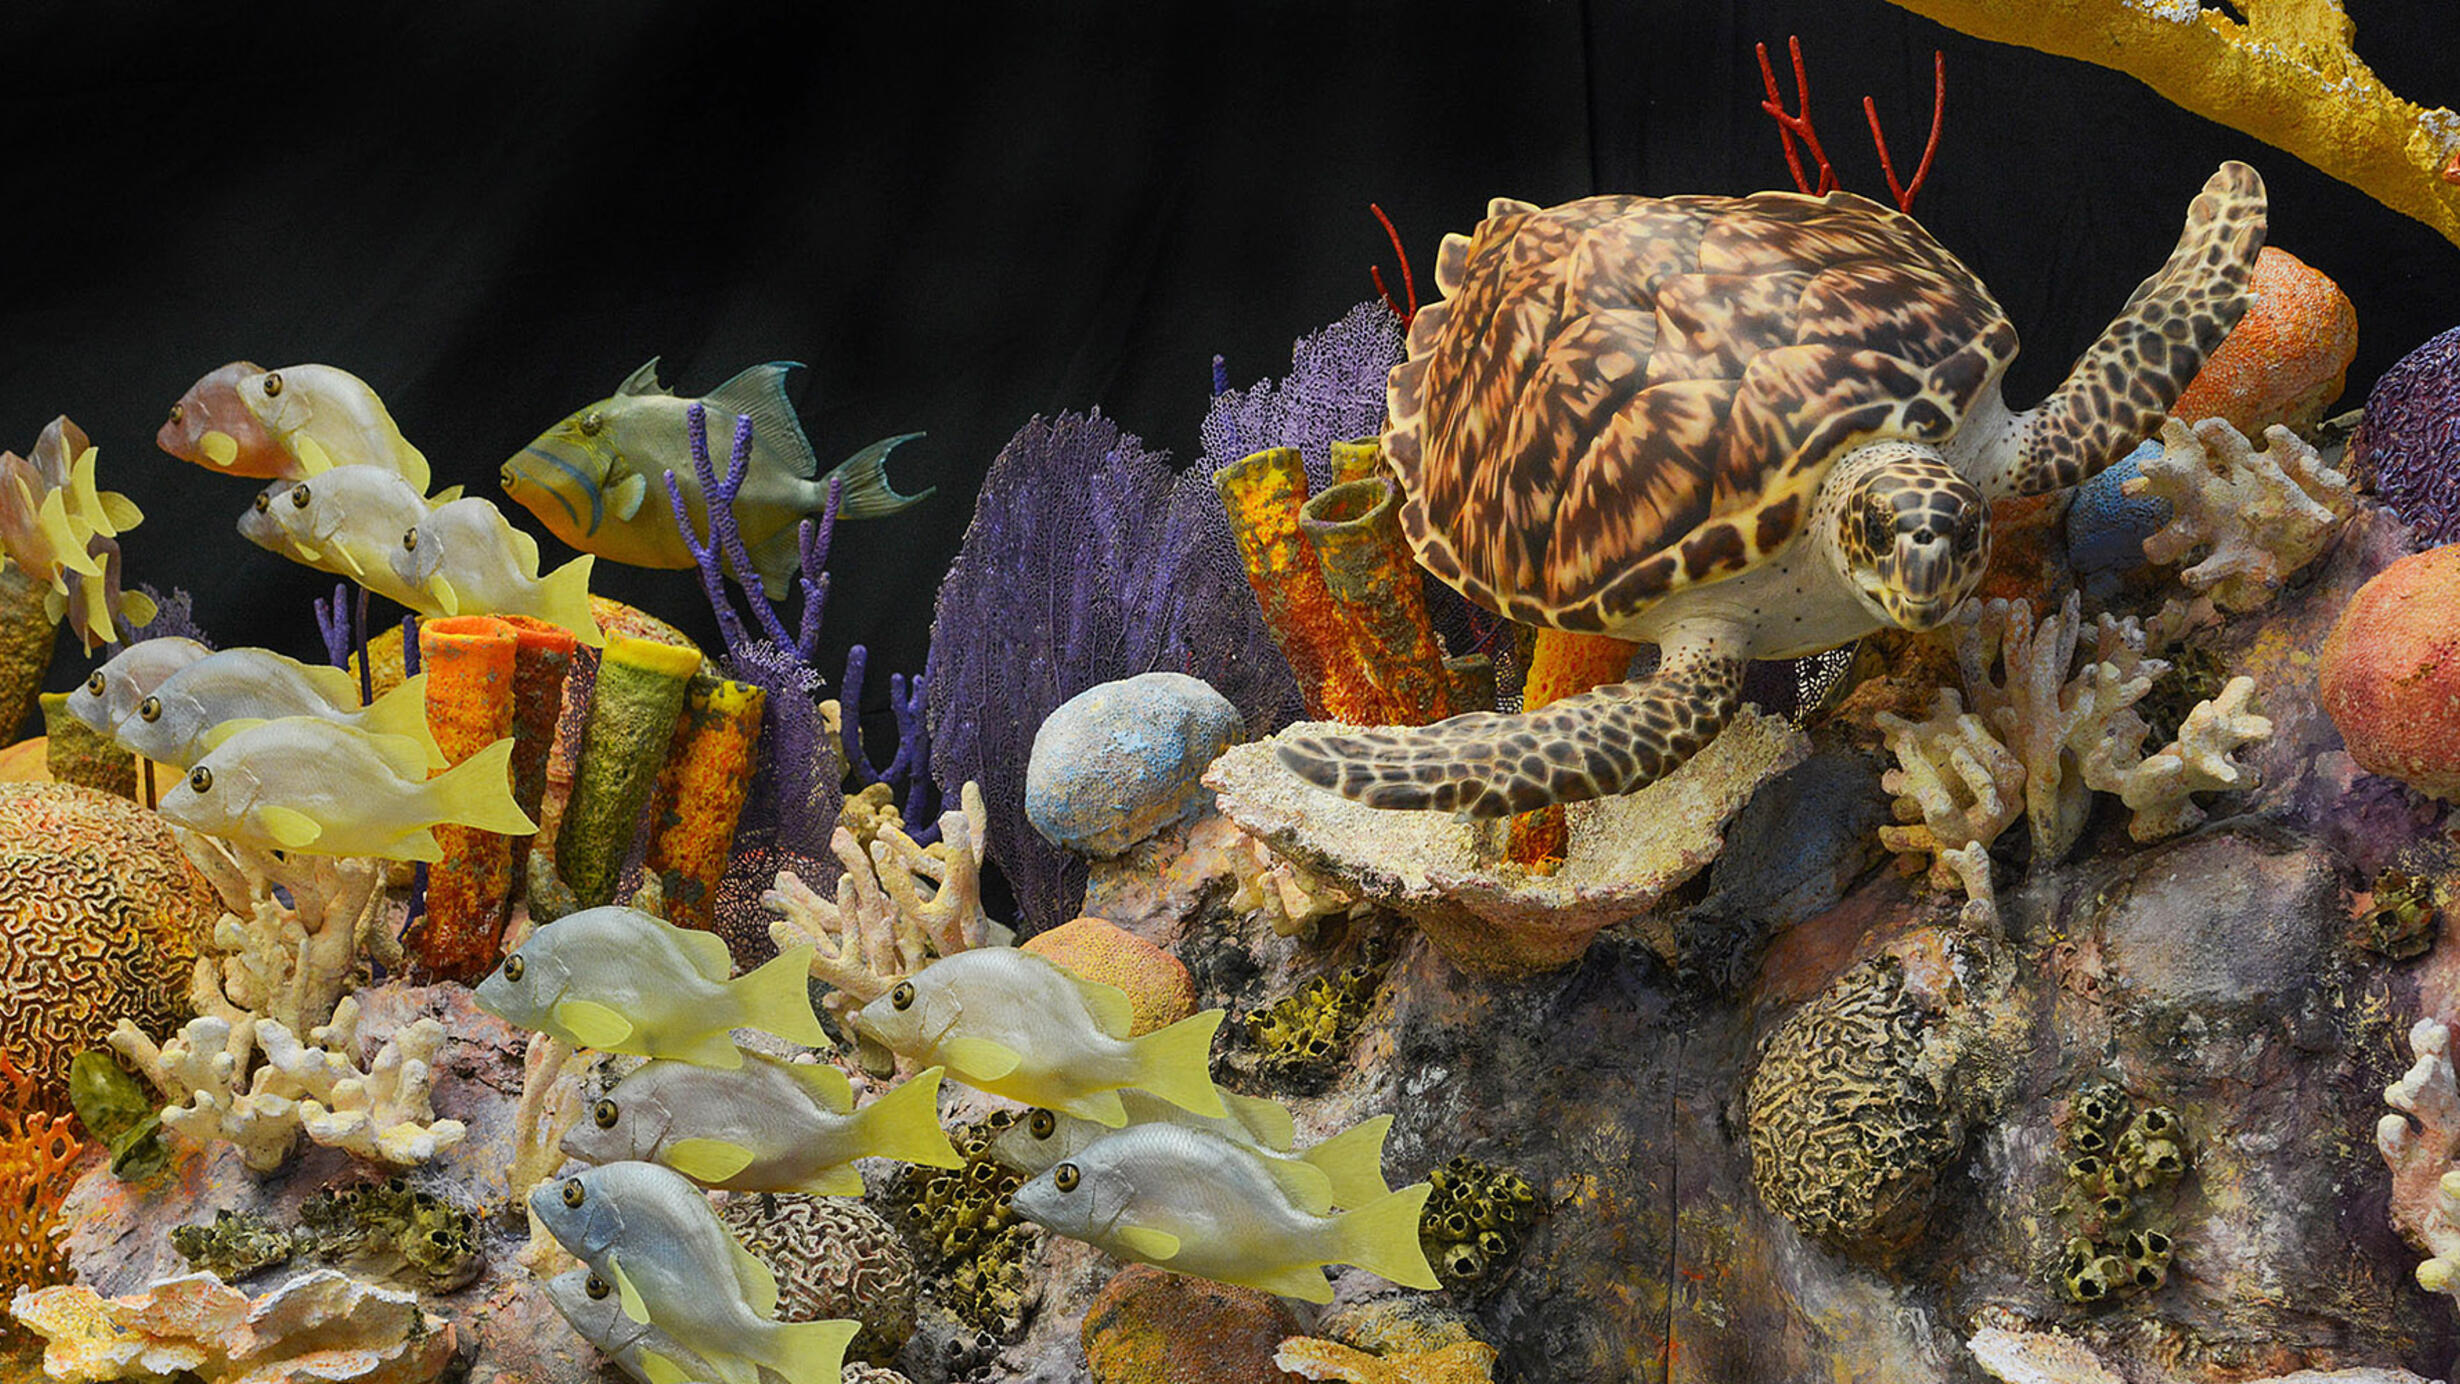 Coral reef model shows a variety of coral in different shapes and colors as well as a school of fish and hawksbill turtle swimming by.